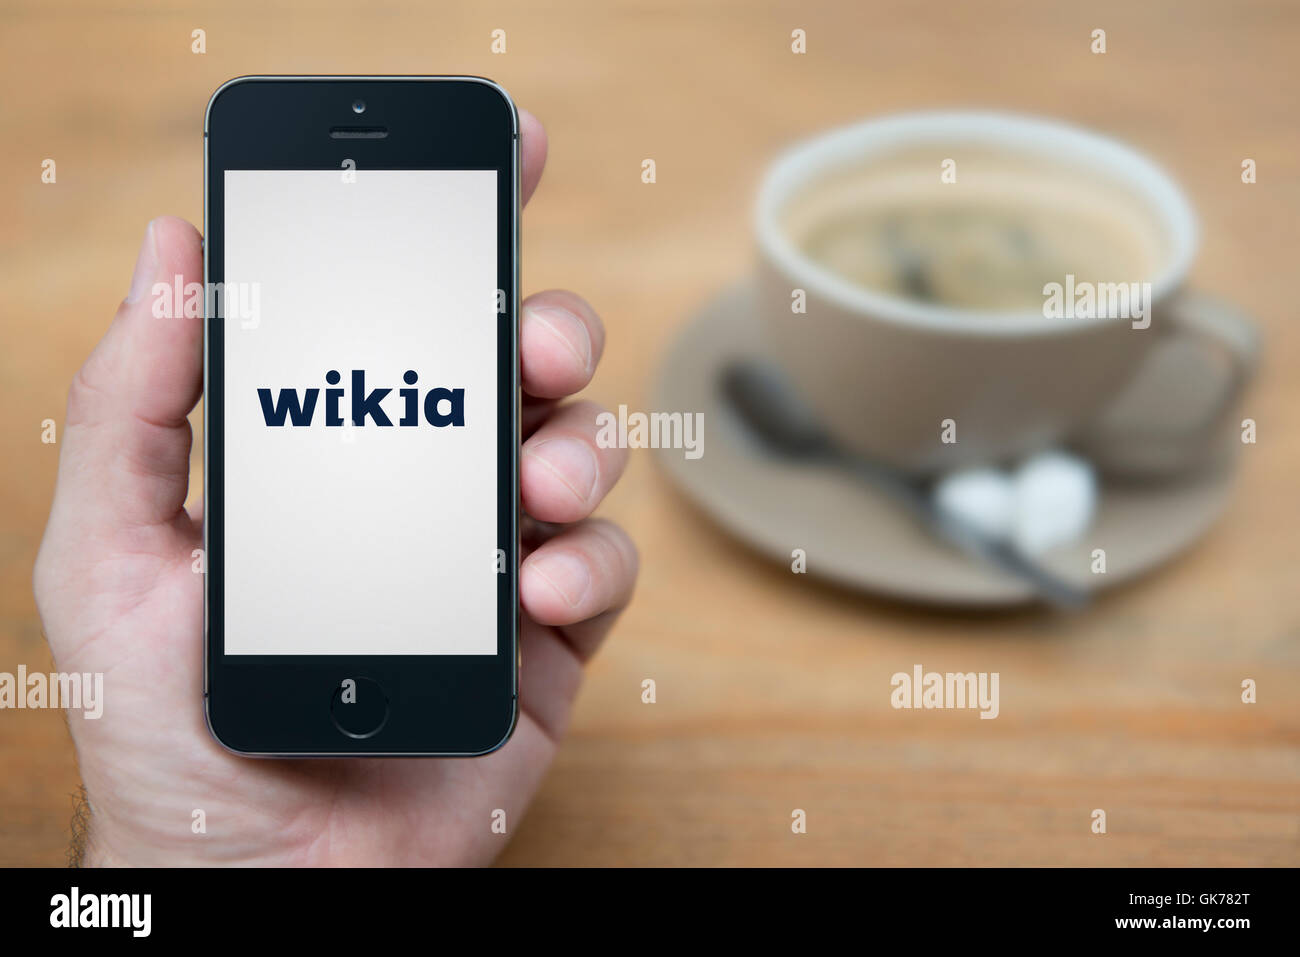 A man looks at his iPhone which displays the Wikia logo, while sat with a cup of coffee (Editorial use only). Stock Photo